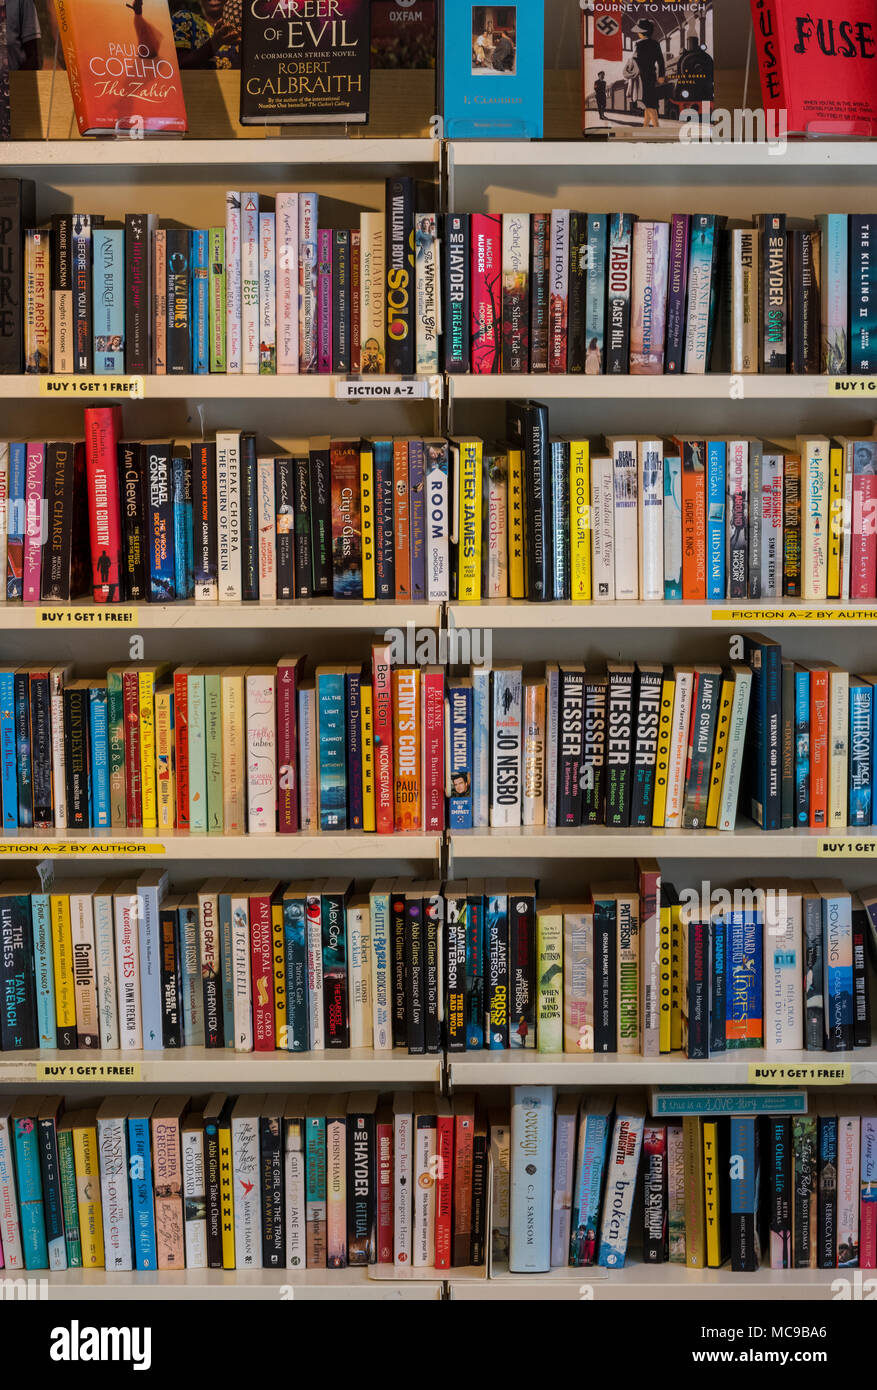 shelves full of second hand and used books on sale in a shop selling pre  -loved literature and written material. libraries and collections of books  Stock Photo - Alamy